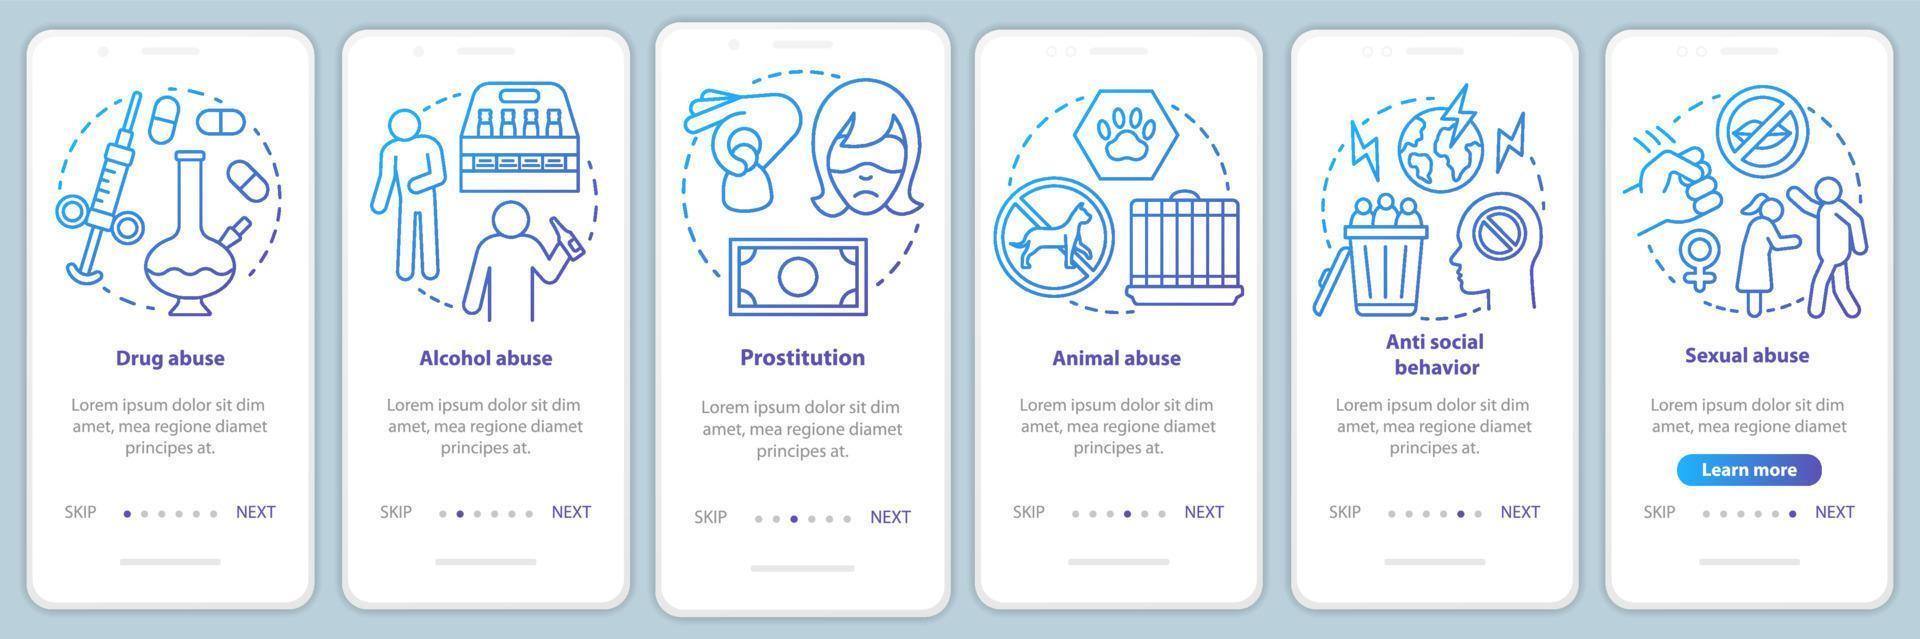 Behavioral problems onboarding mobile app page screen with linear concept. Drug and alcohol abuse, sexual harassment walkthrough graphic instructions. UX, UI, GUI vector template with icon